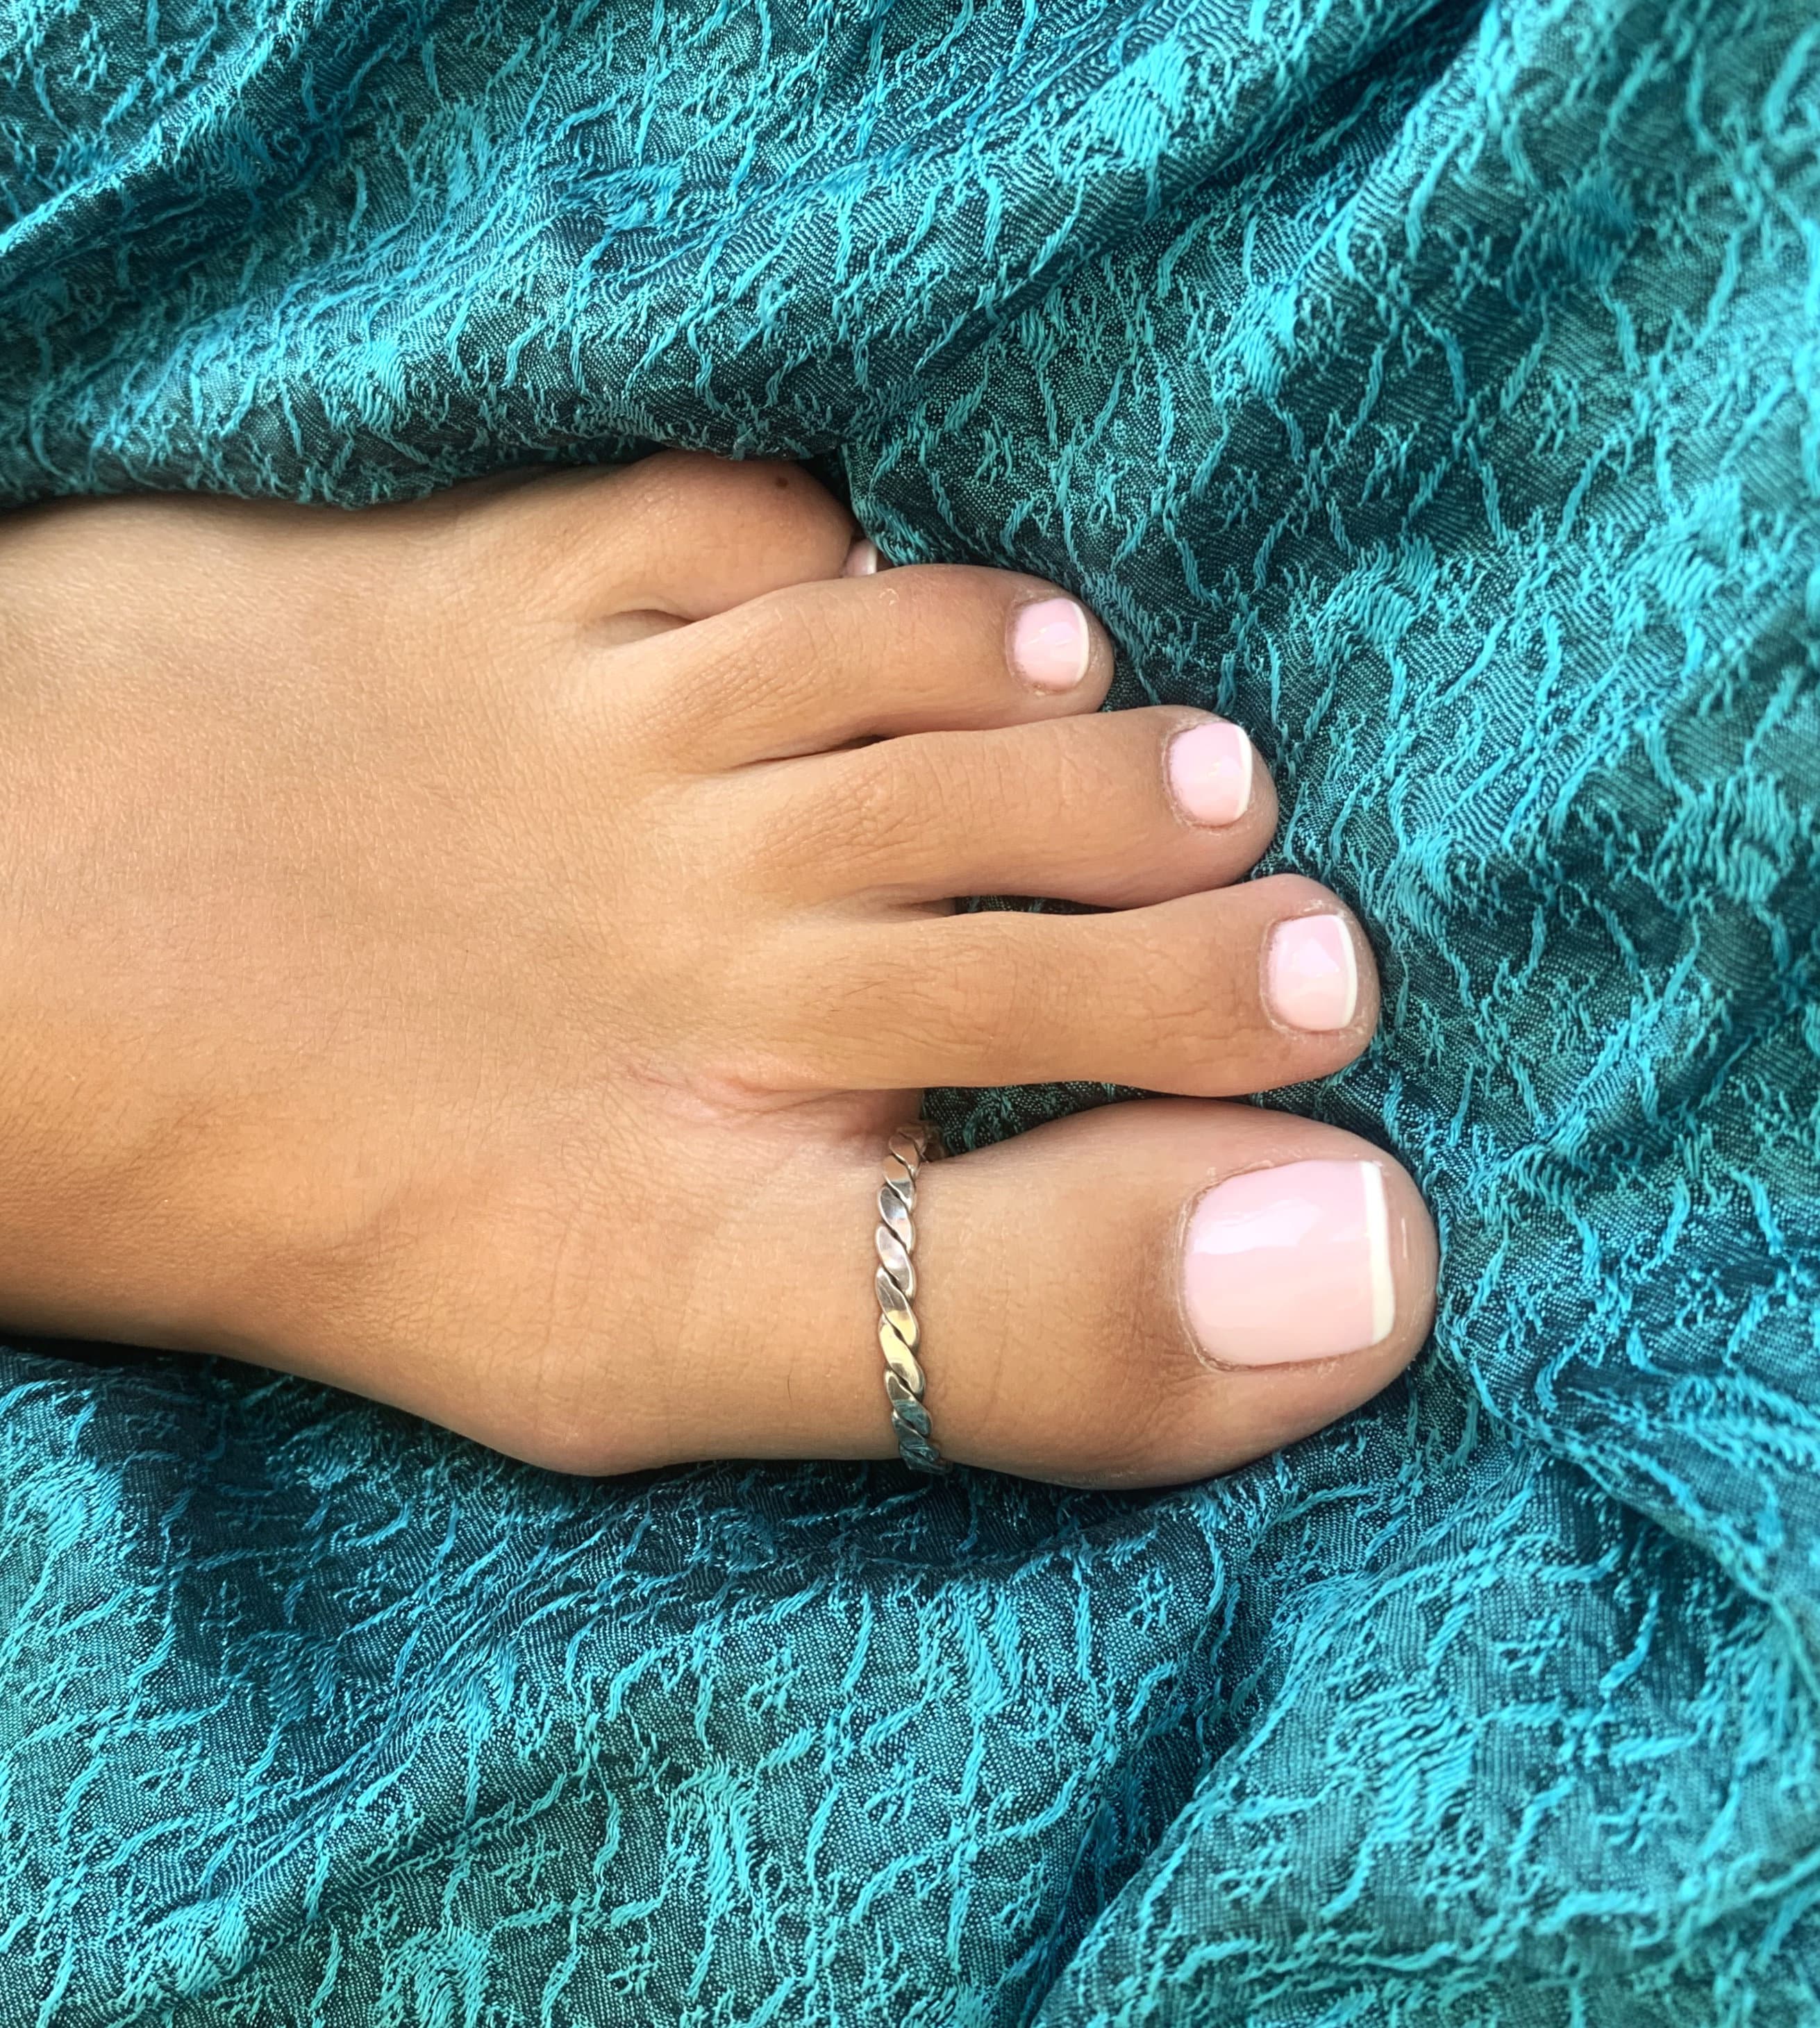  Big Toe Ring Sterling Silver 2mm High Polished Adjustable  Jewelry for the Toes : Handmade Products